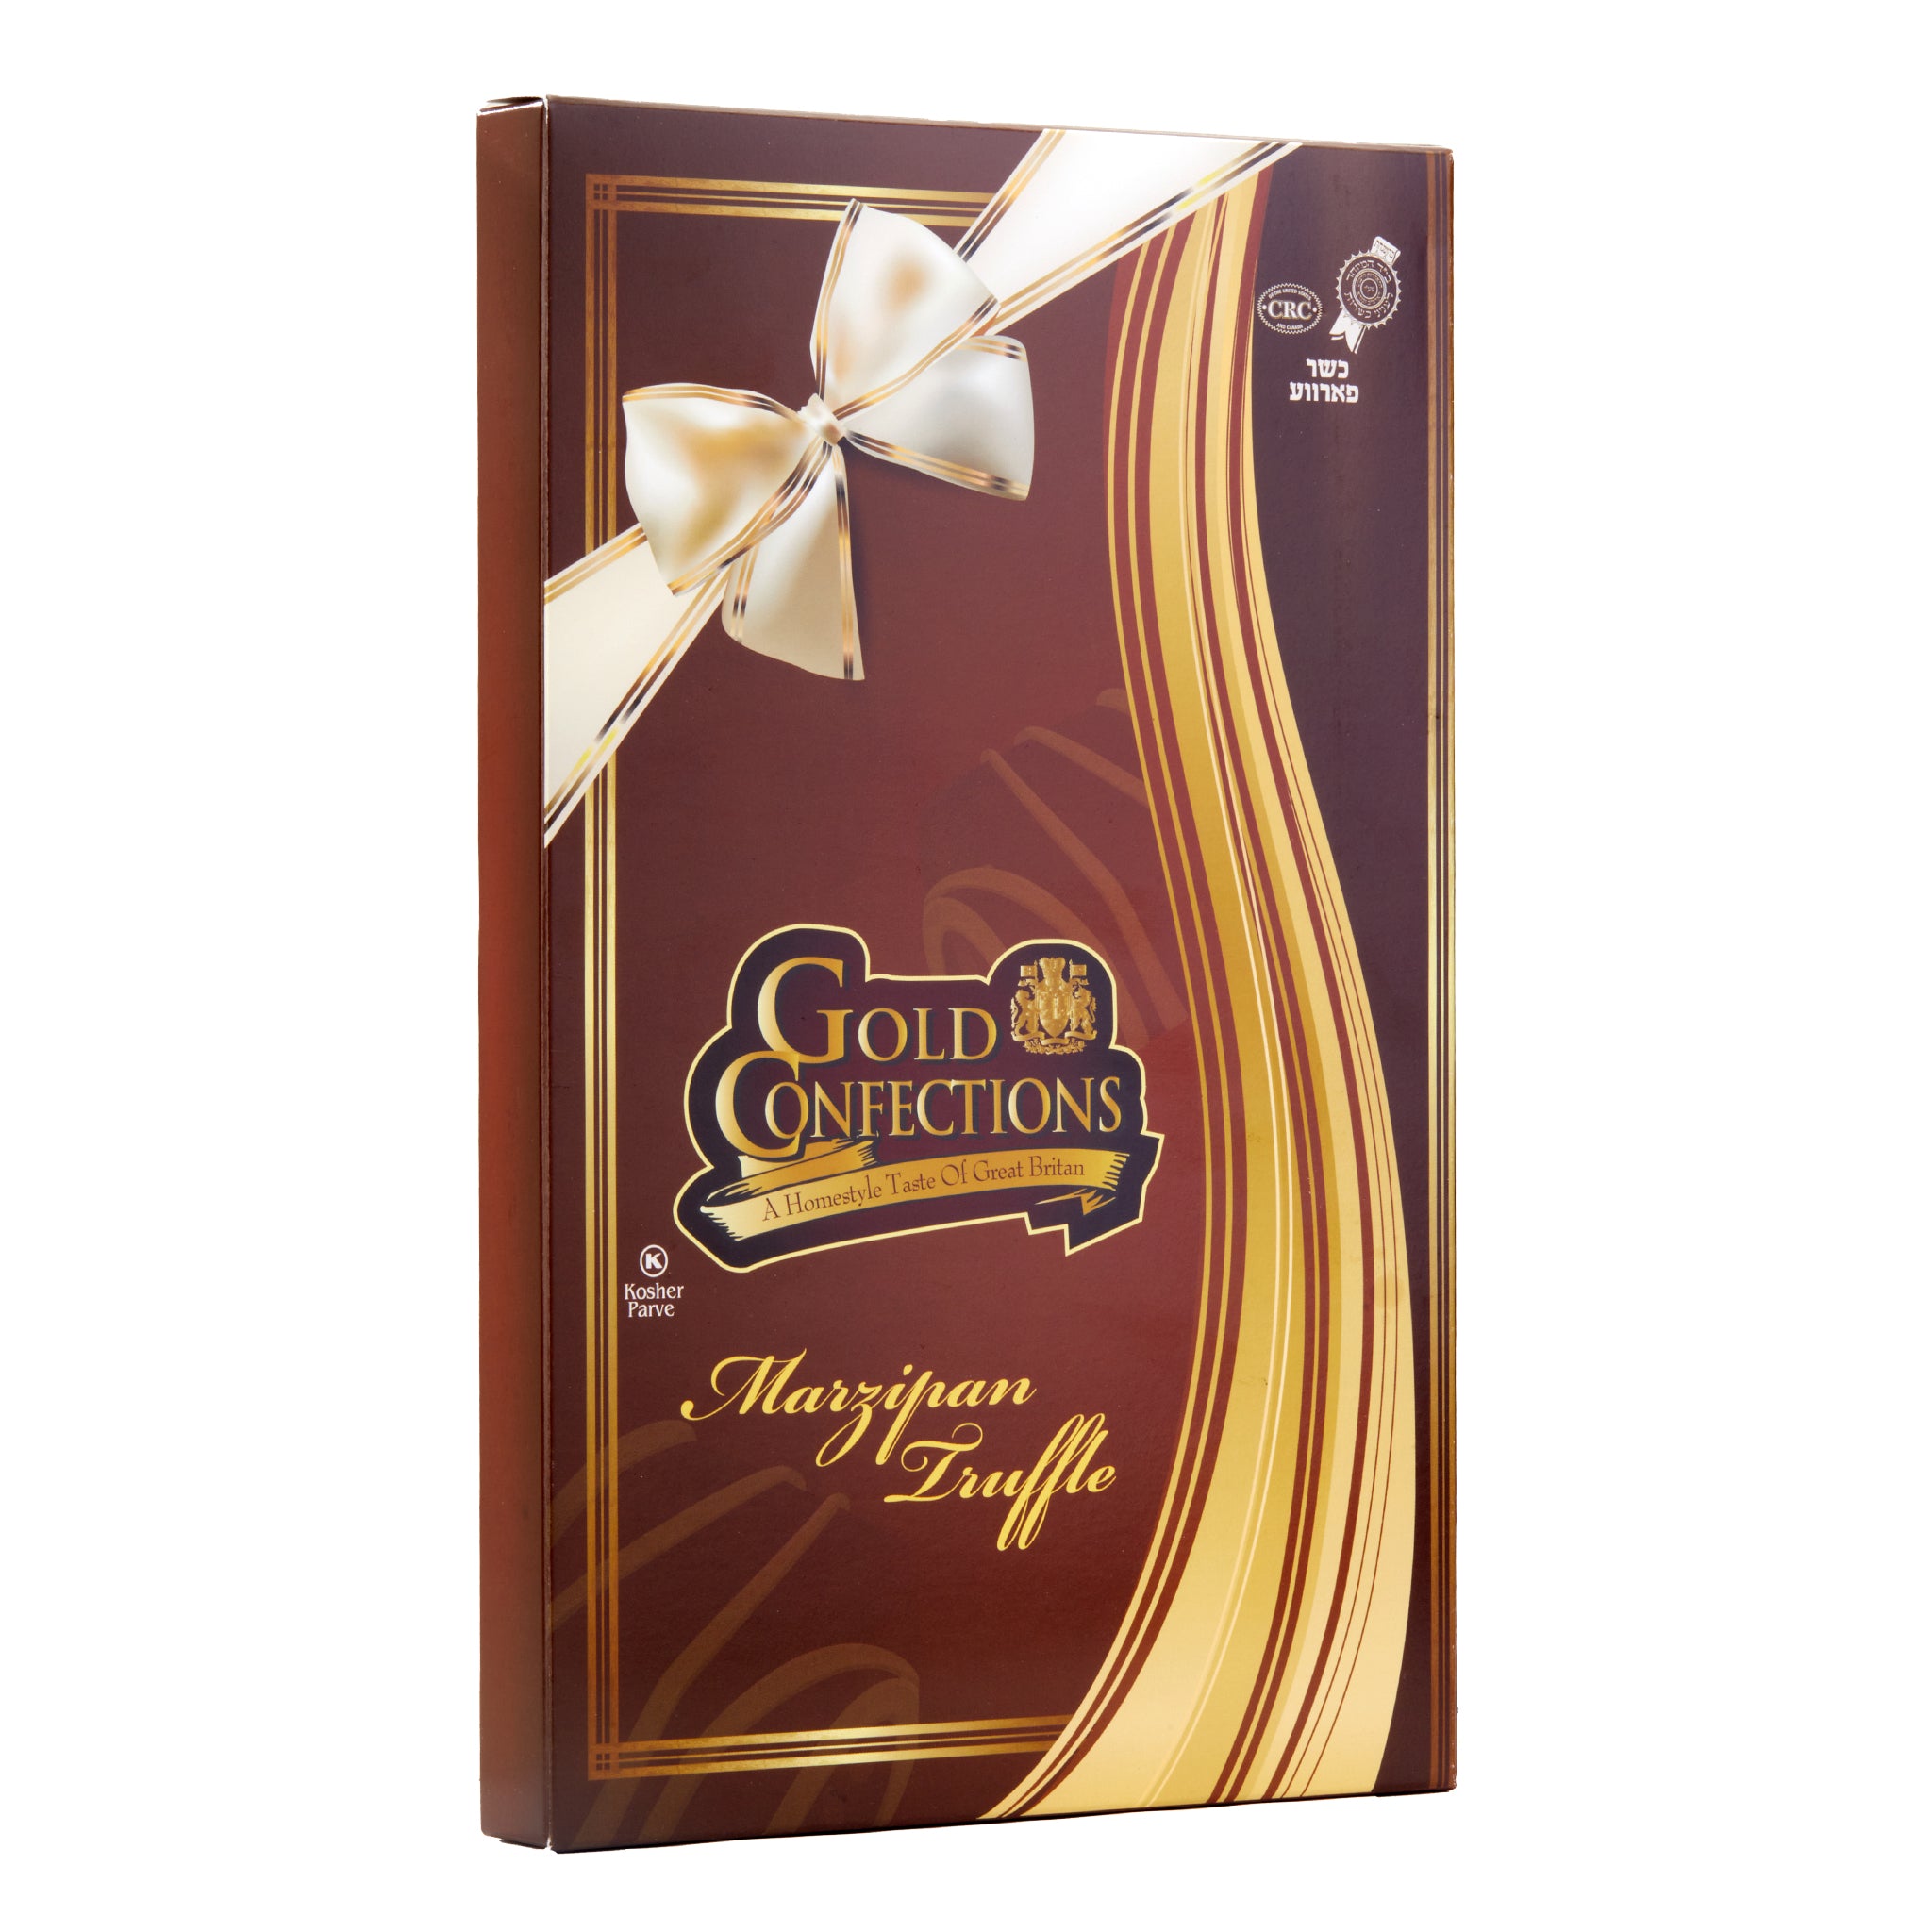 Deluxe Box Gold Confections Marzipan truffle